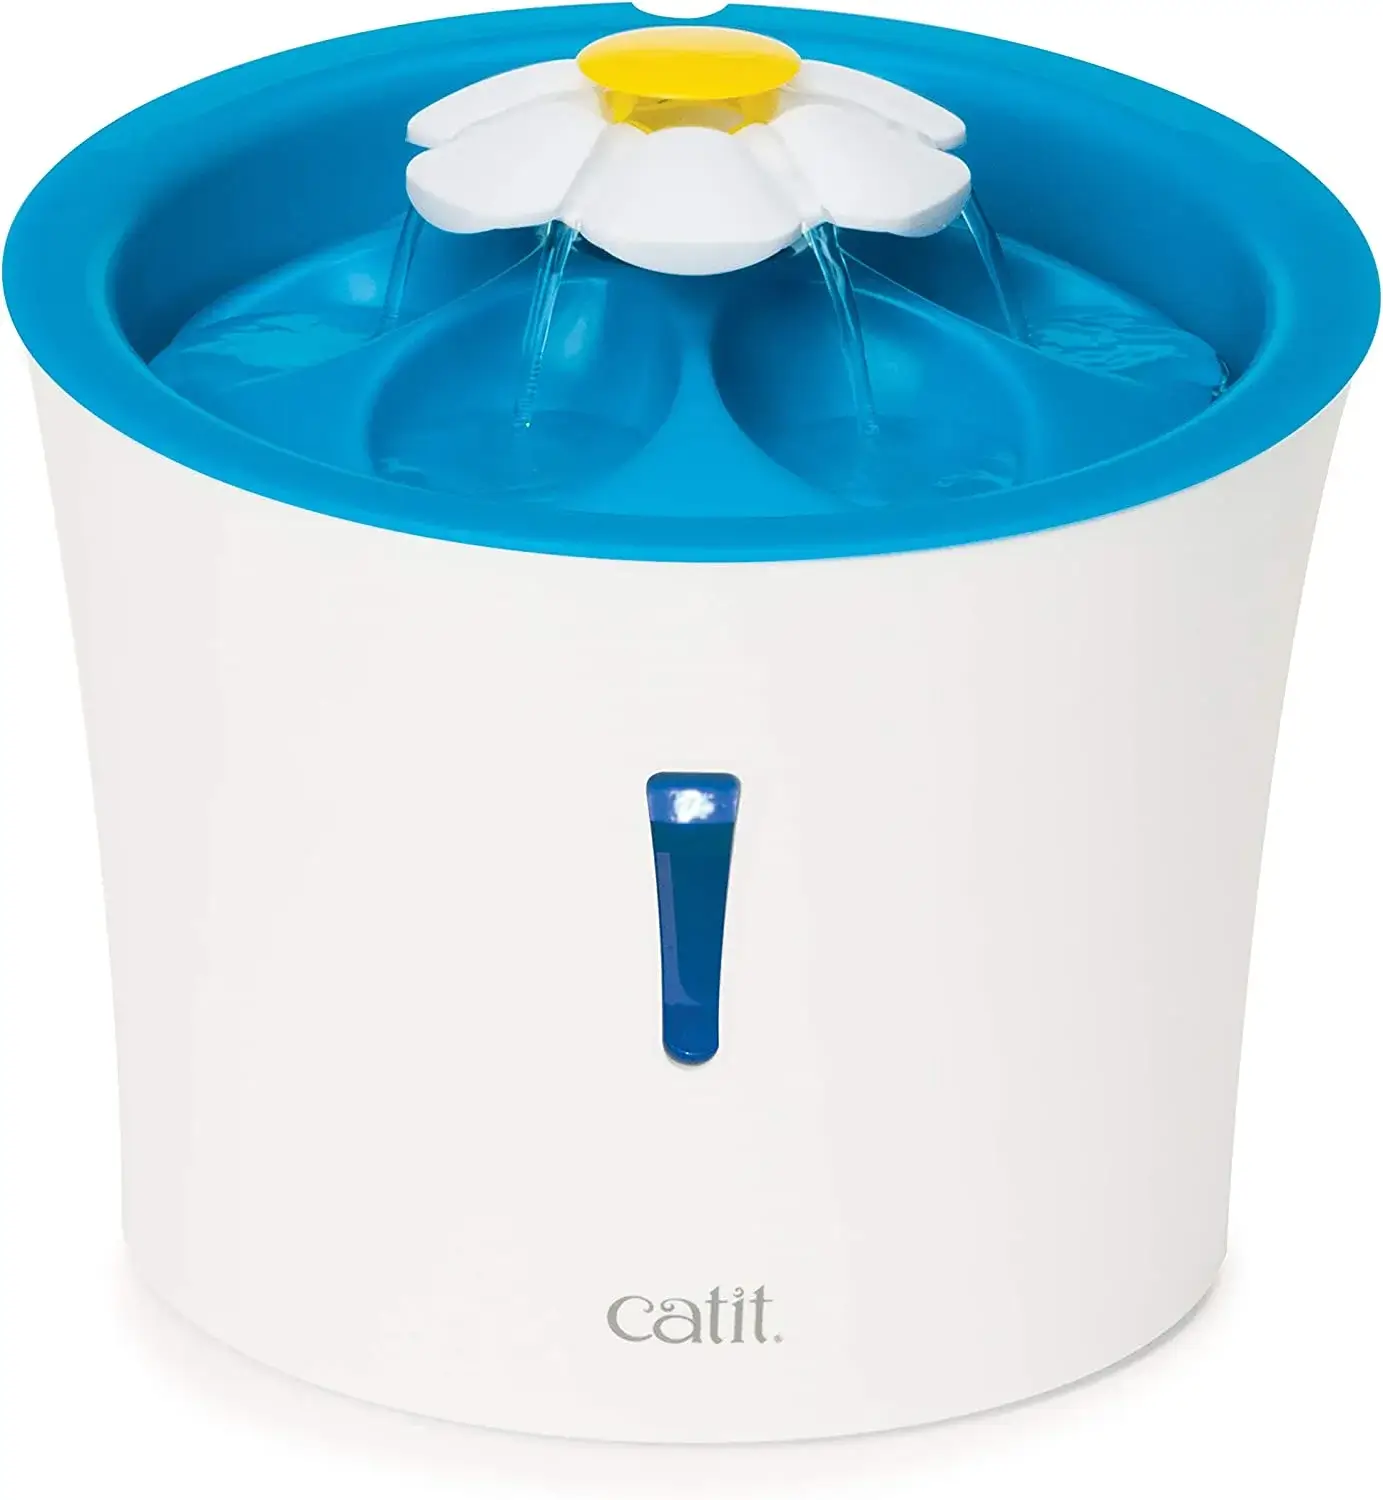 Catit LED Flower Fountain with Triple Action Filter